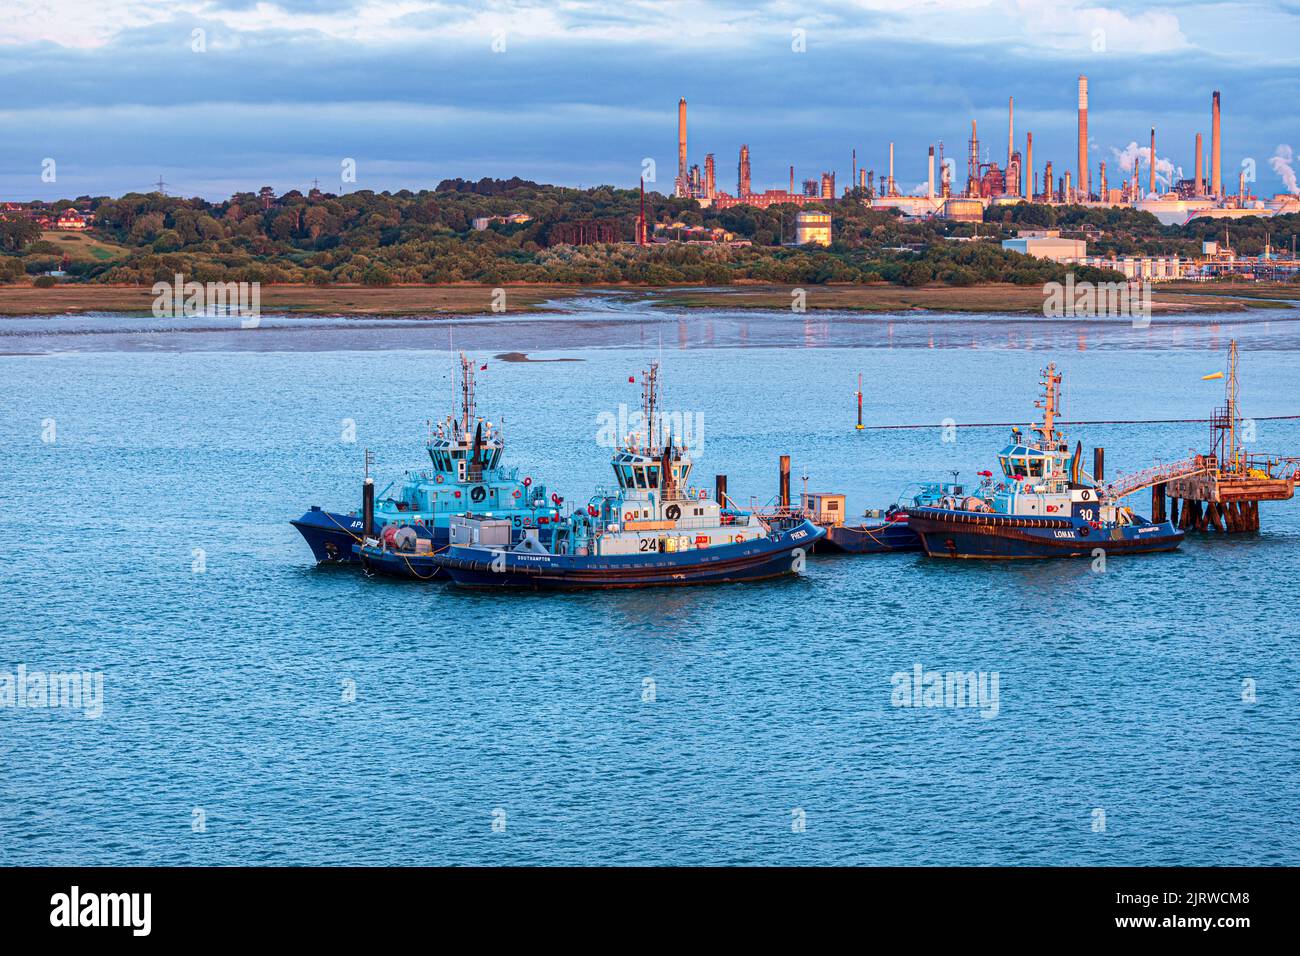 Tug boats Apex, Phenix & Lomax at dawn moored at the Esso owned Fawley Oil Refinery at Fawley, Hampshire UK Stock Photo